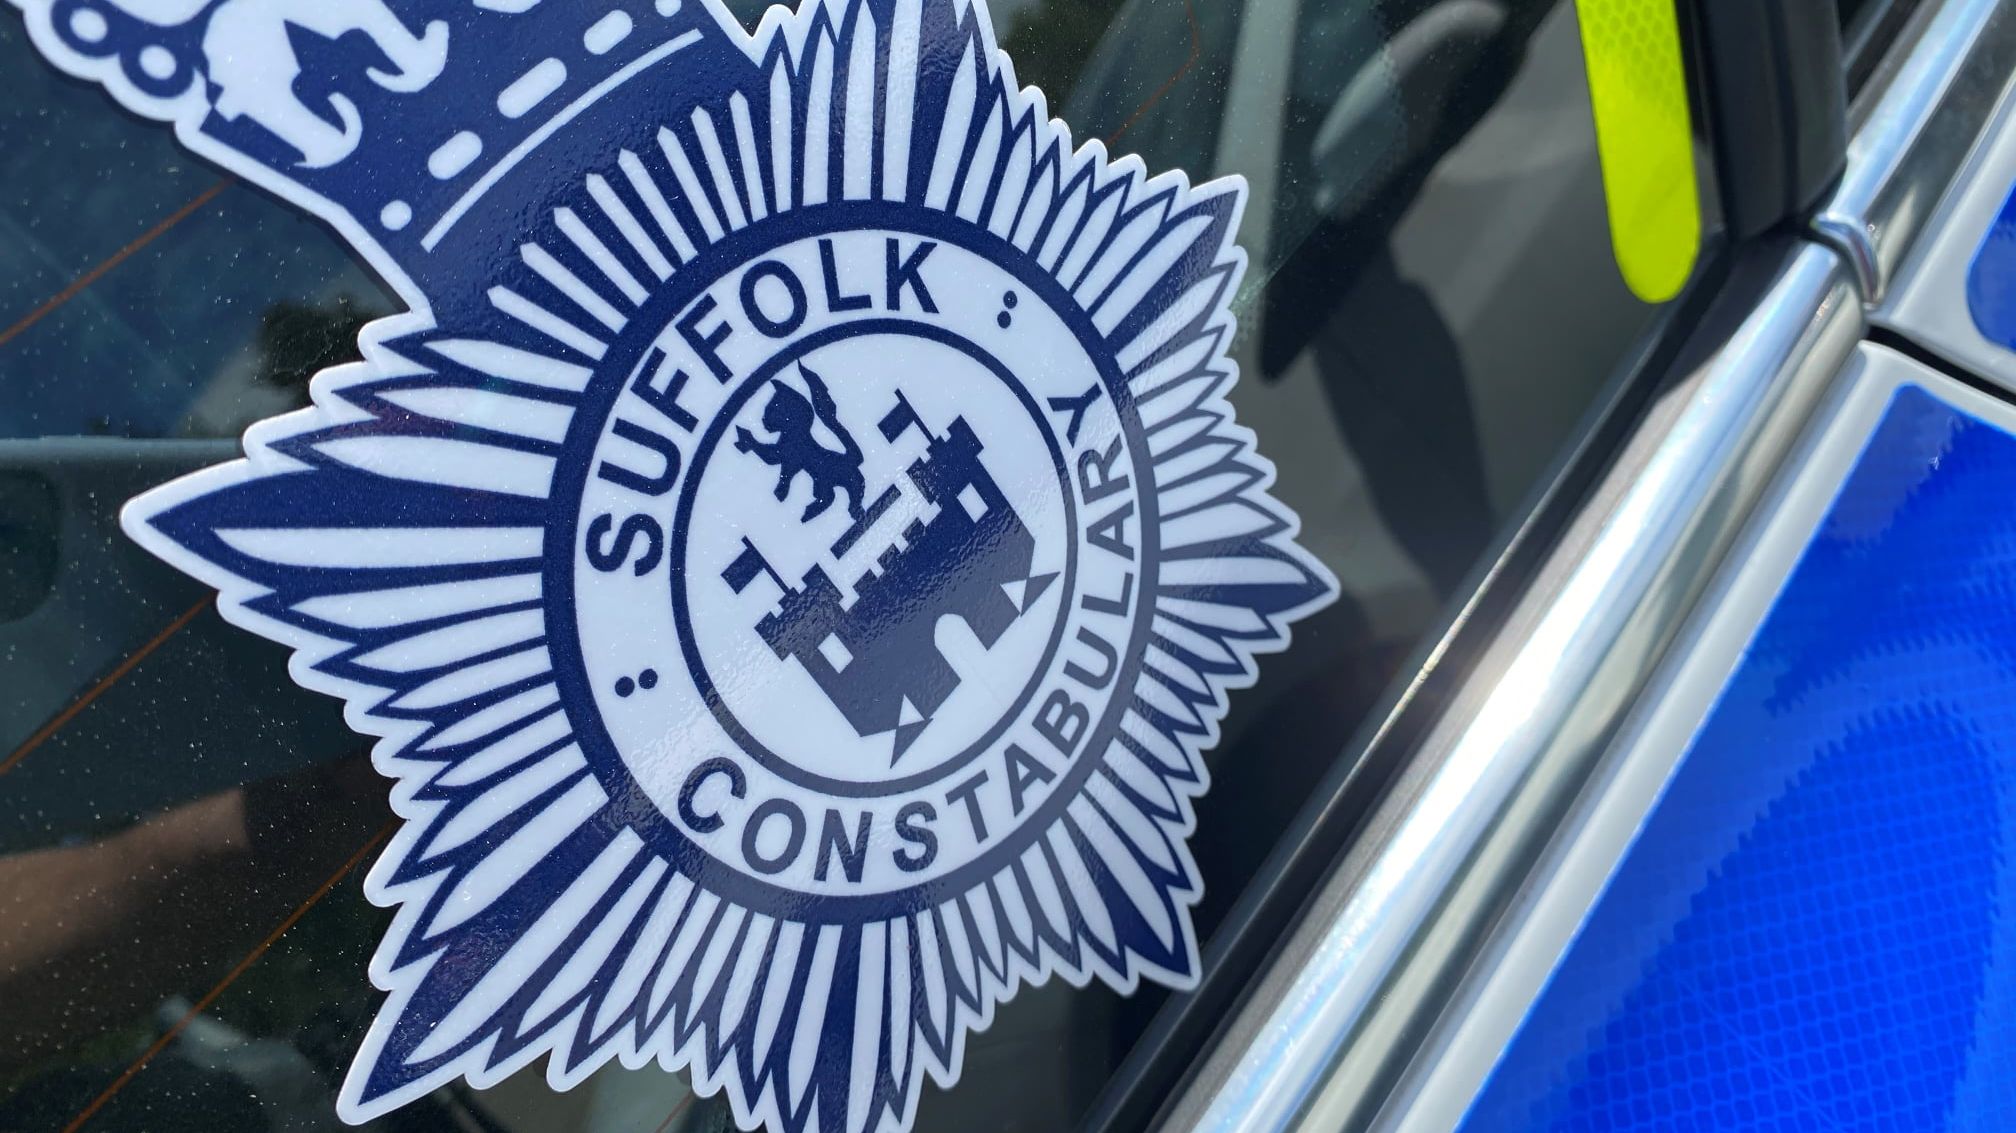 Suffolk Police Federation speaks out to support officers News